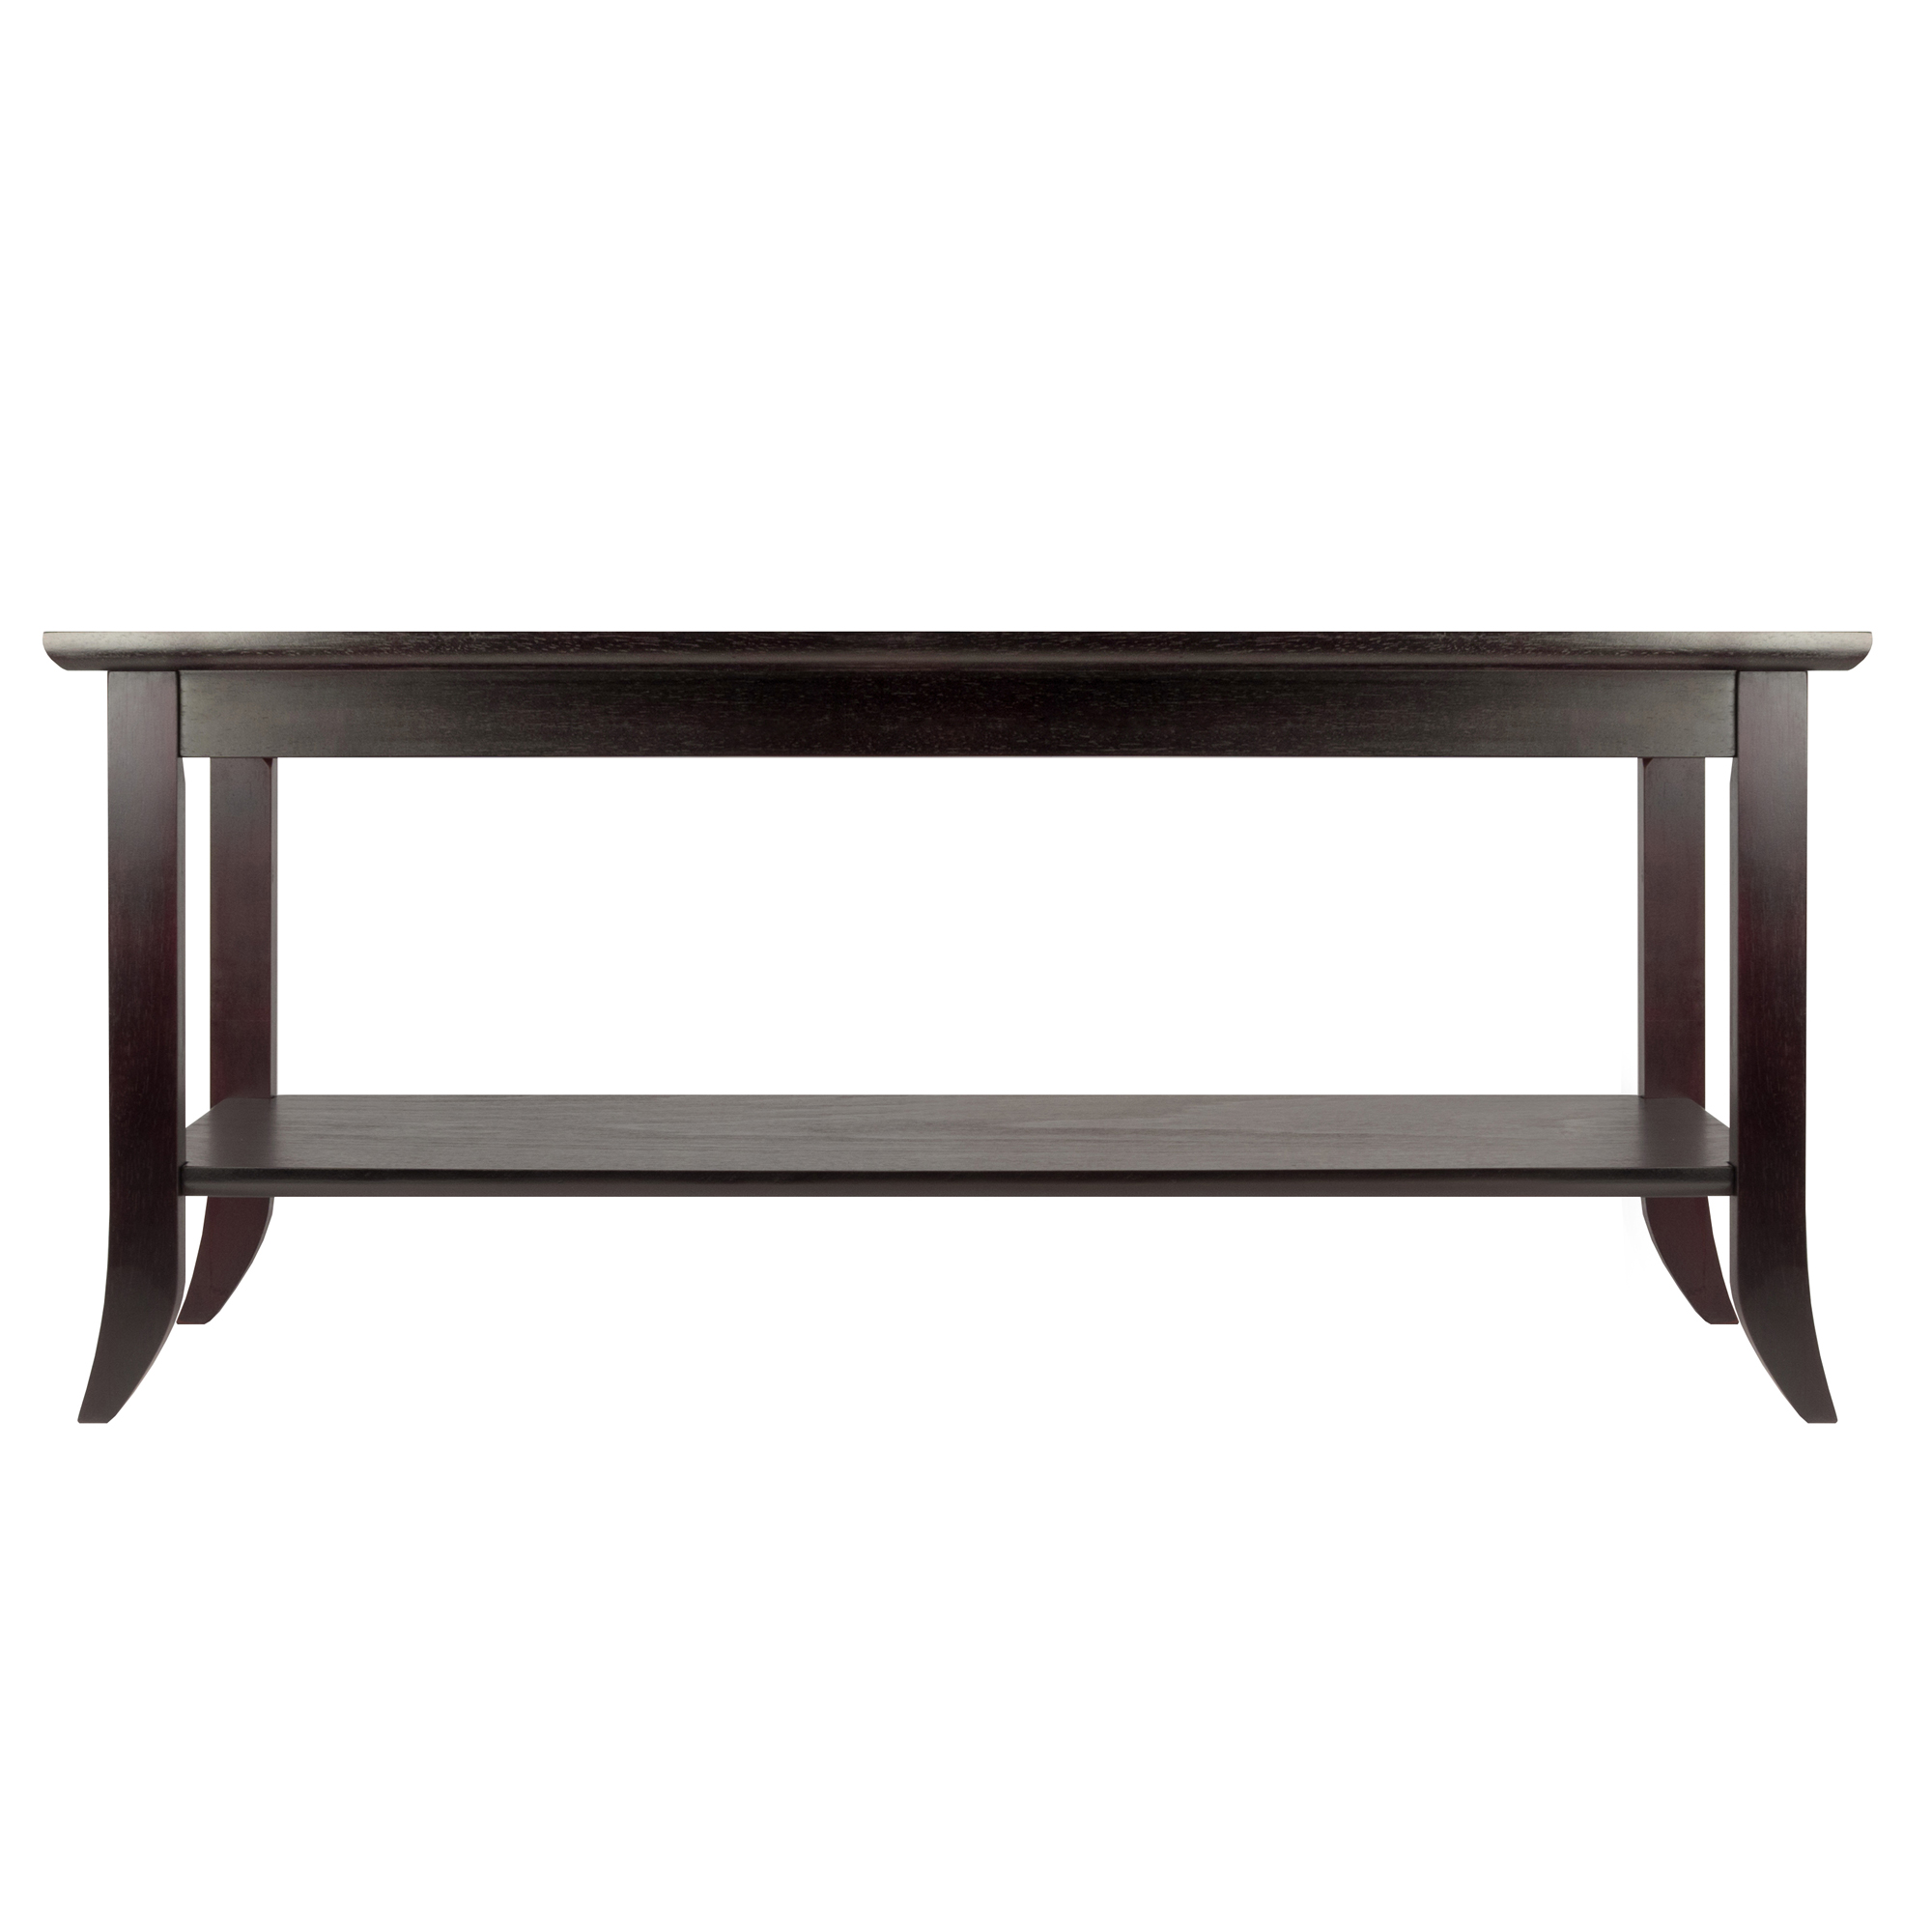 Winsome Wood Genoa Coffee Glass Top Table, Espresso Finish - image 3 of 5